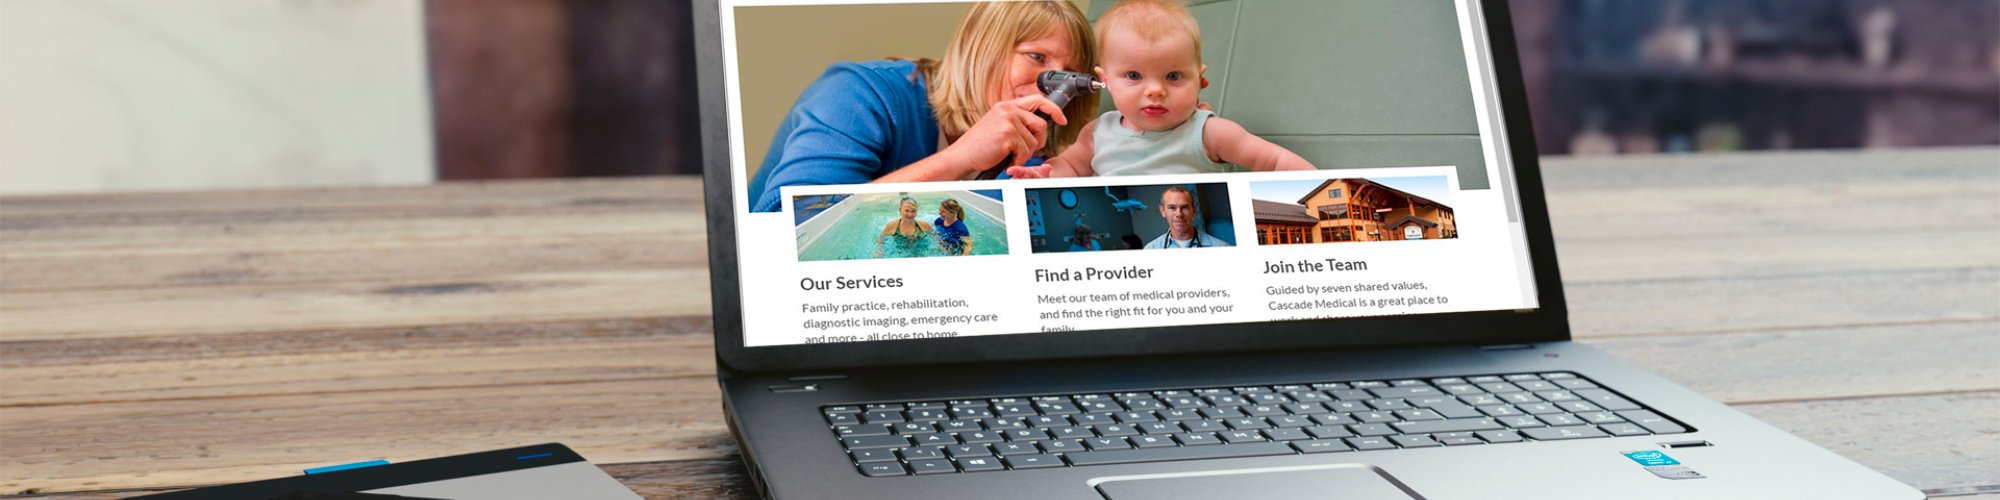 The new cascademedical.org is displayed on a laptop.